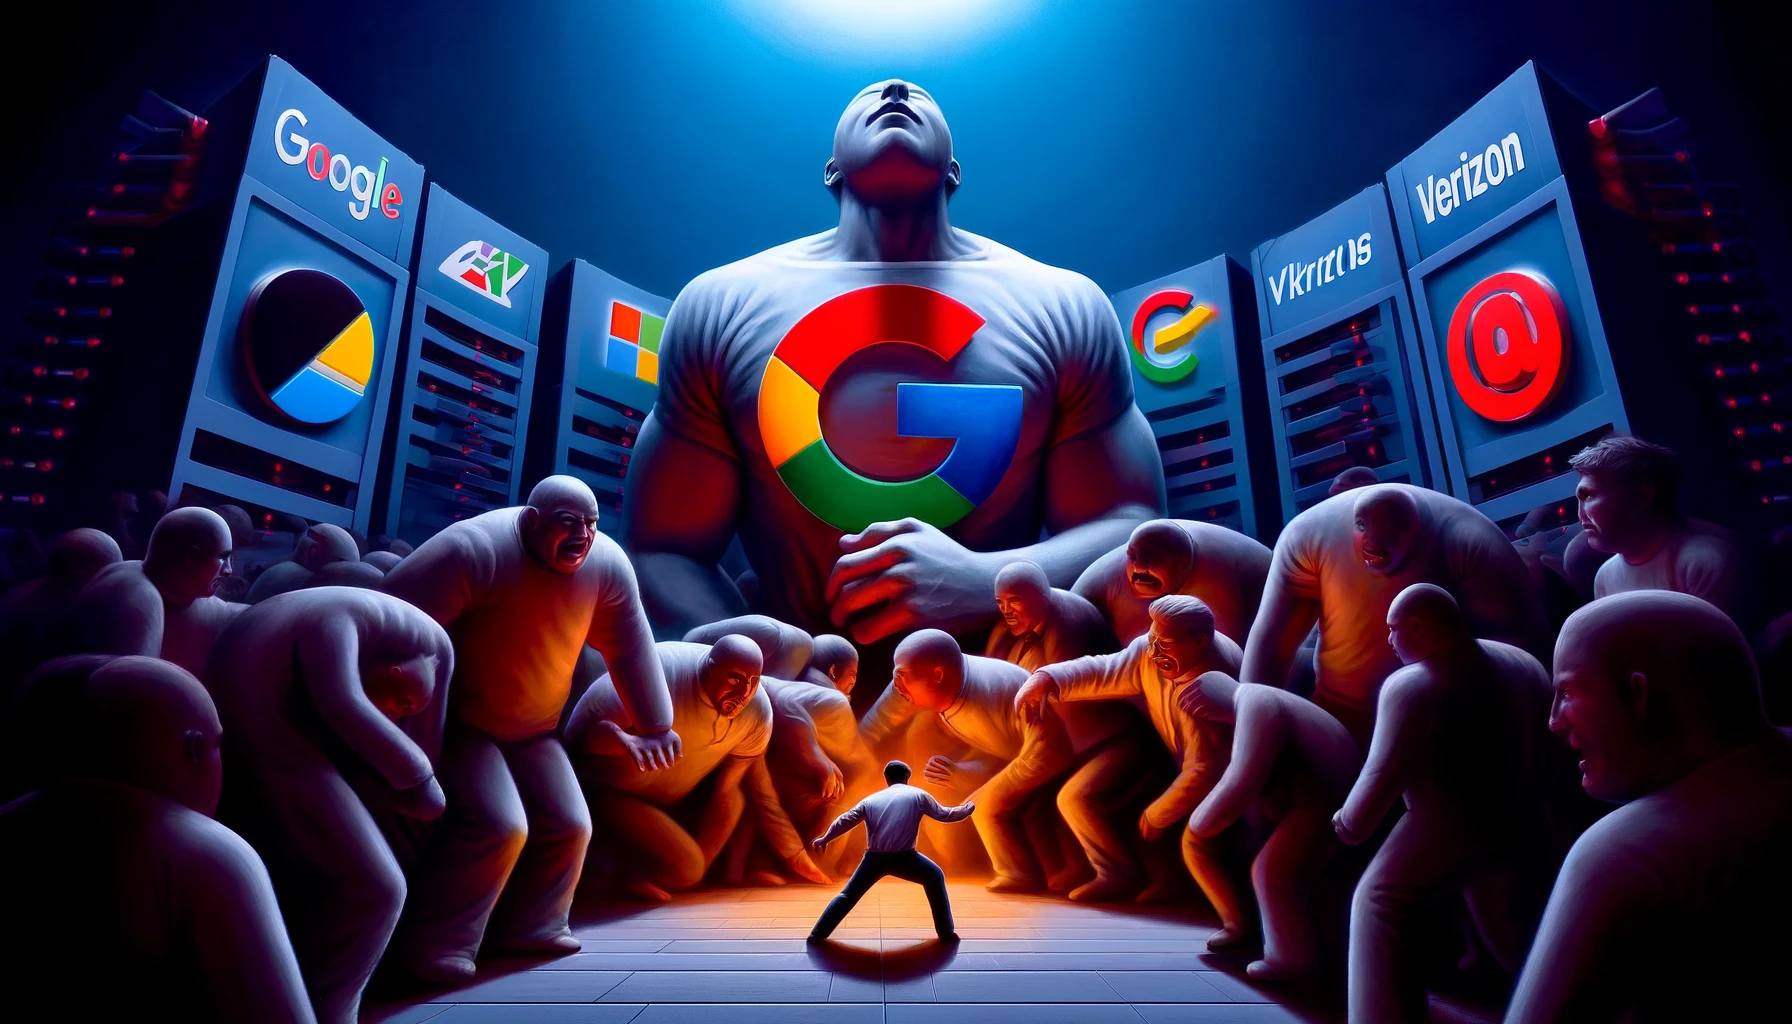 dramatic scene where large figures representing big email companies Google Microsoft Verizon are surrounding and overpowering smaller ones